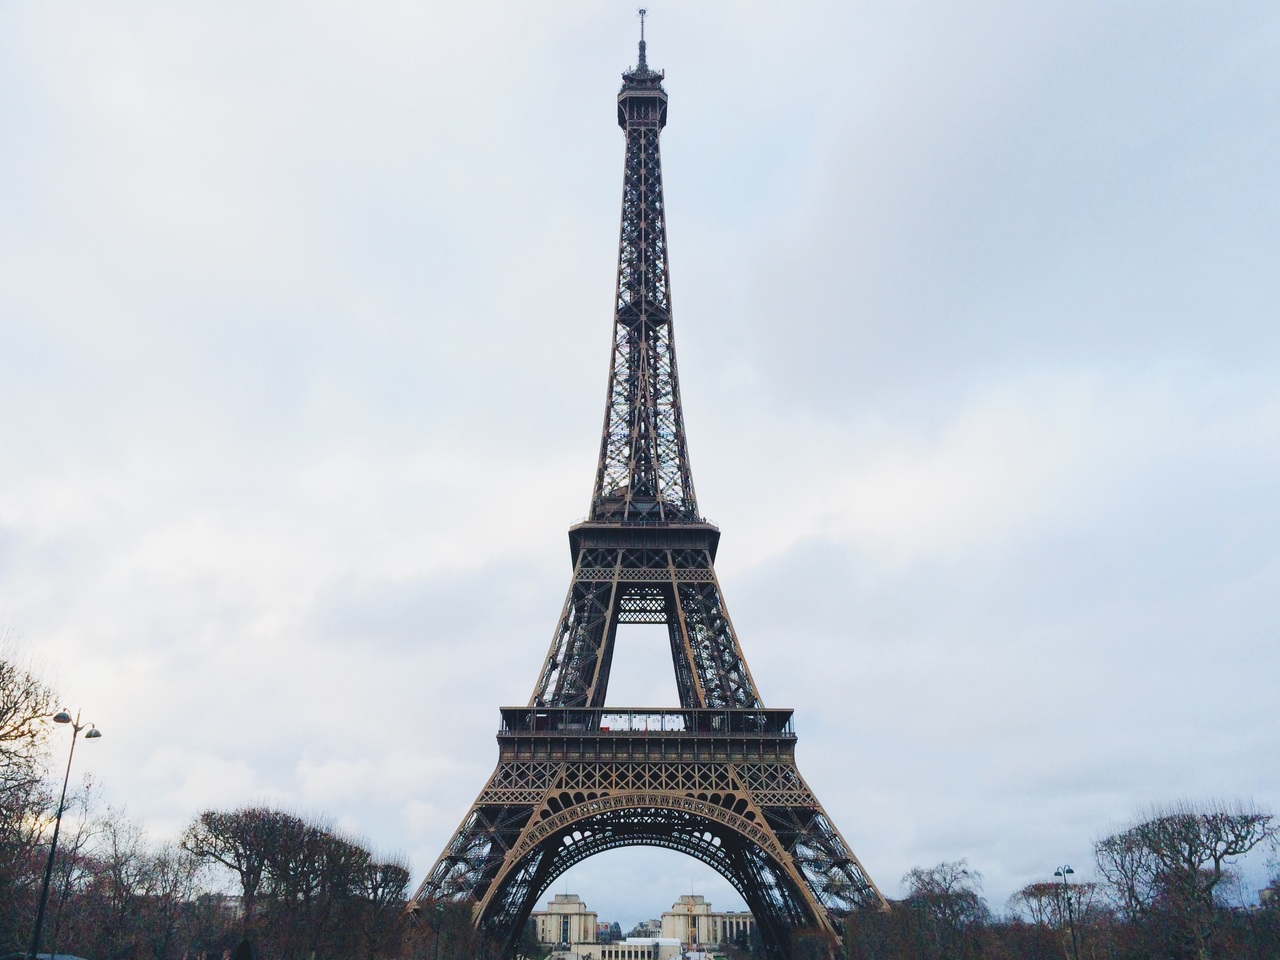 Is it just simpler to Climb the Eiffel tower?